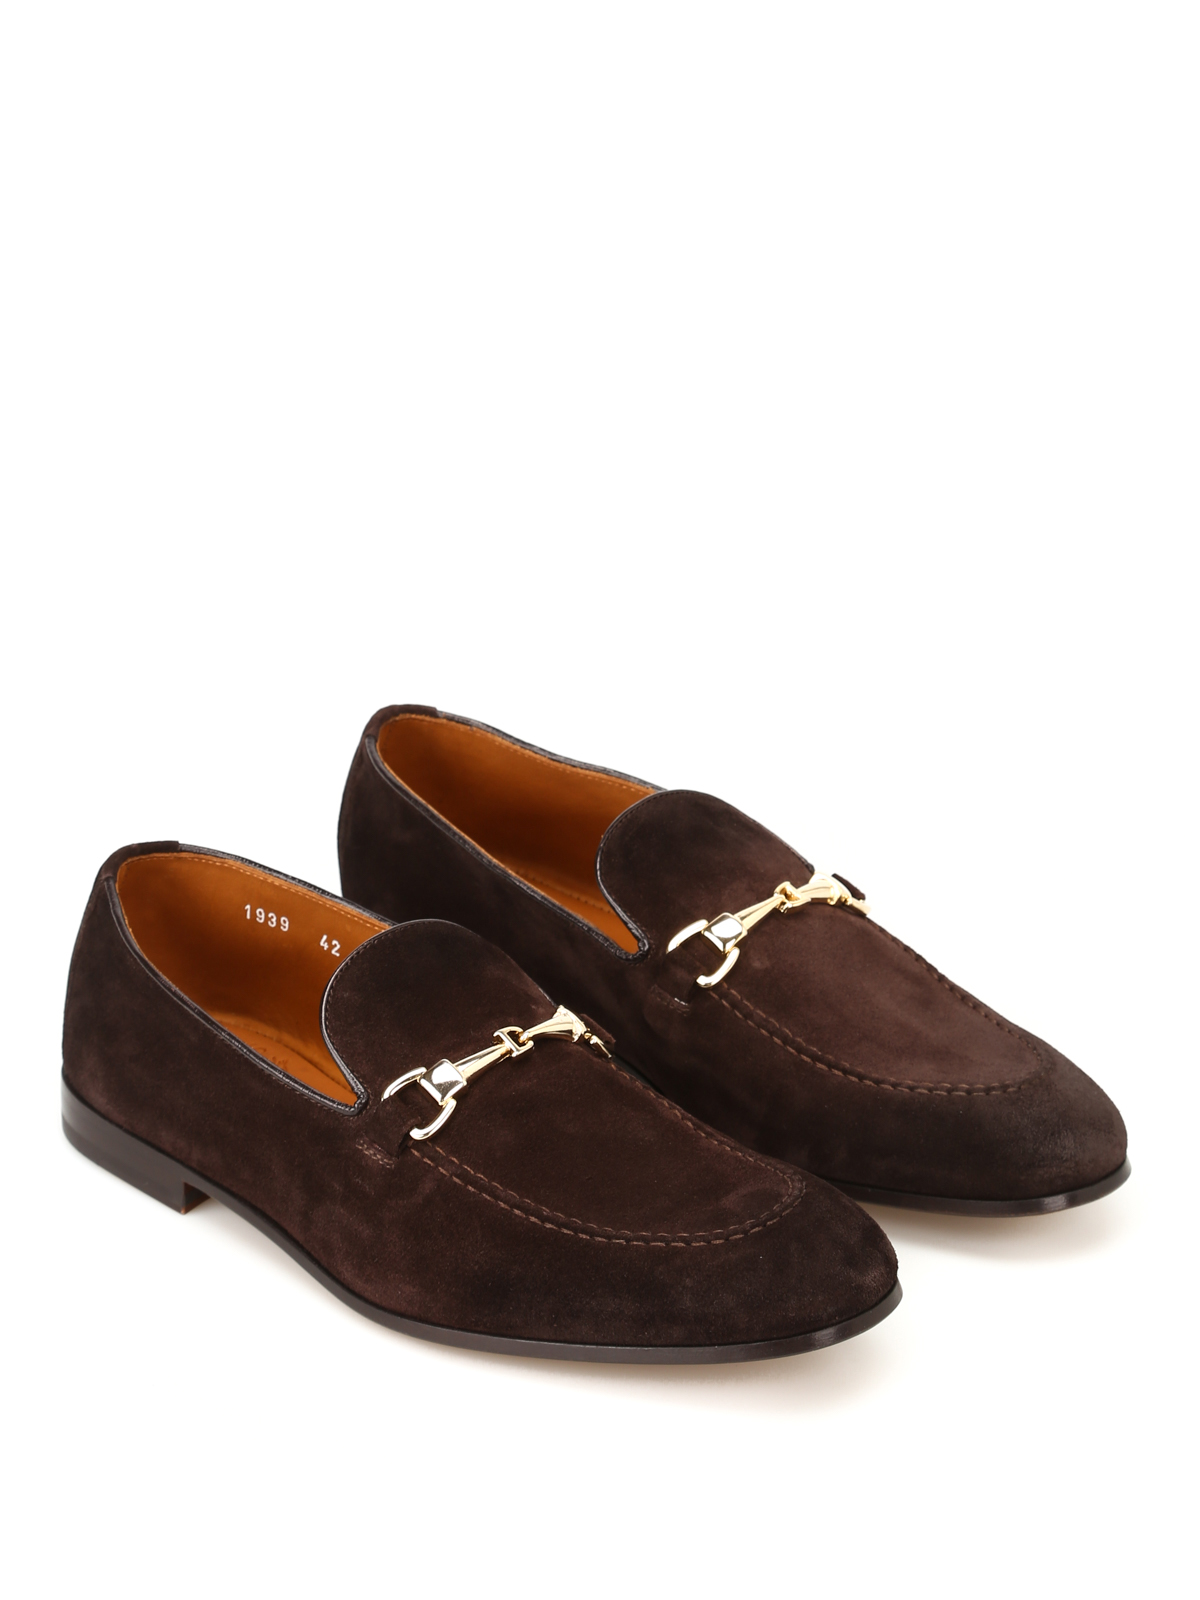 Light Point brown suede loafers 